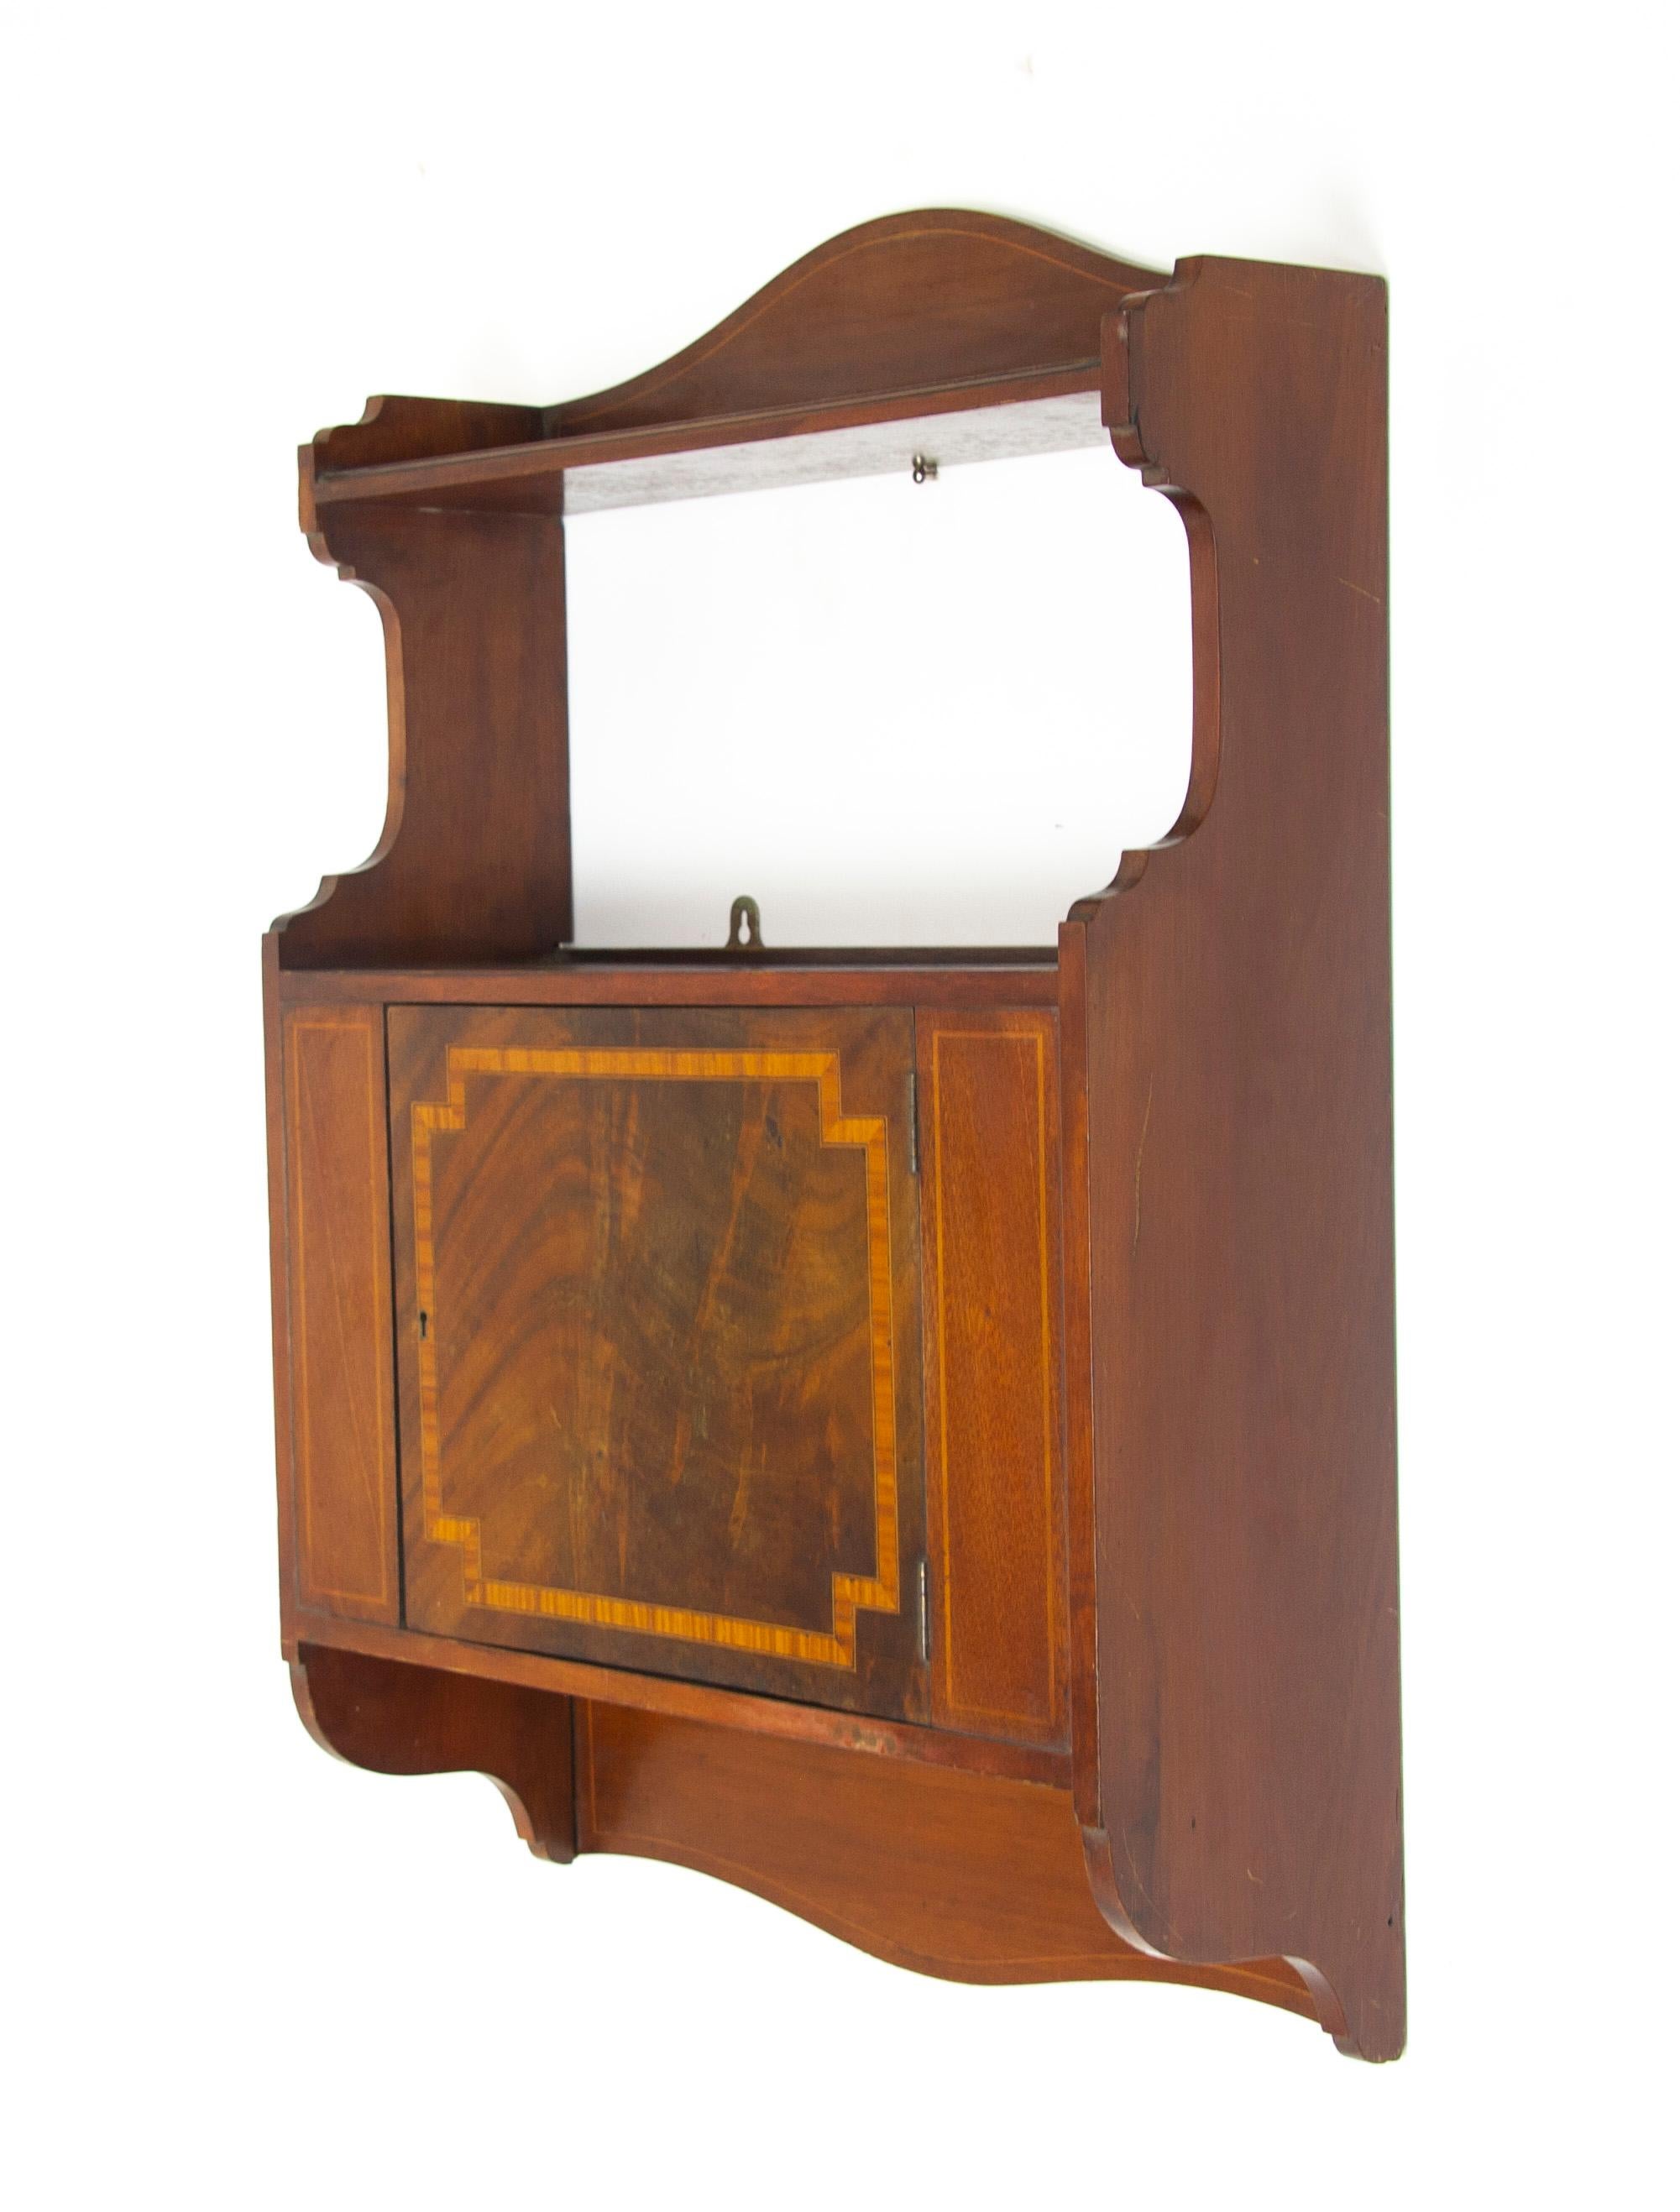 Antique wall cabinet, Scottish Iinlaid walnut hanging wall cabinet, antique furniture, Scotland 1910, B1369

Scotland 1910
Solid walnut and veneers
Original finish
Shaped back with single shelf below
Inlaid front sides
Single inlaid